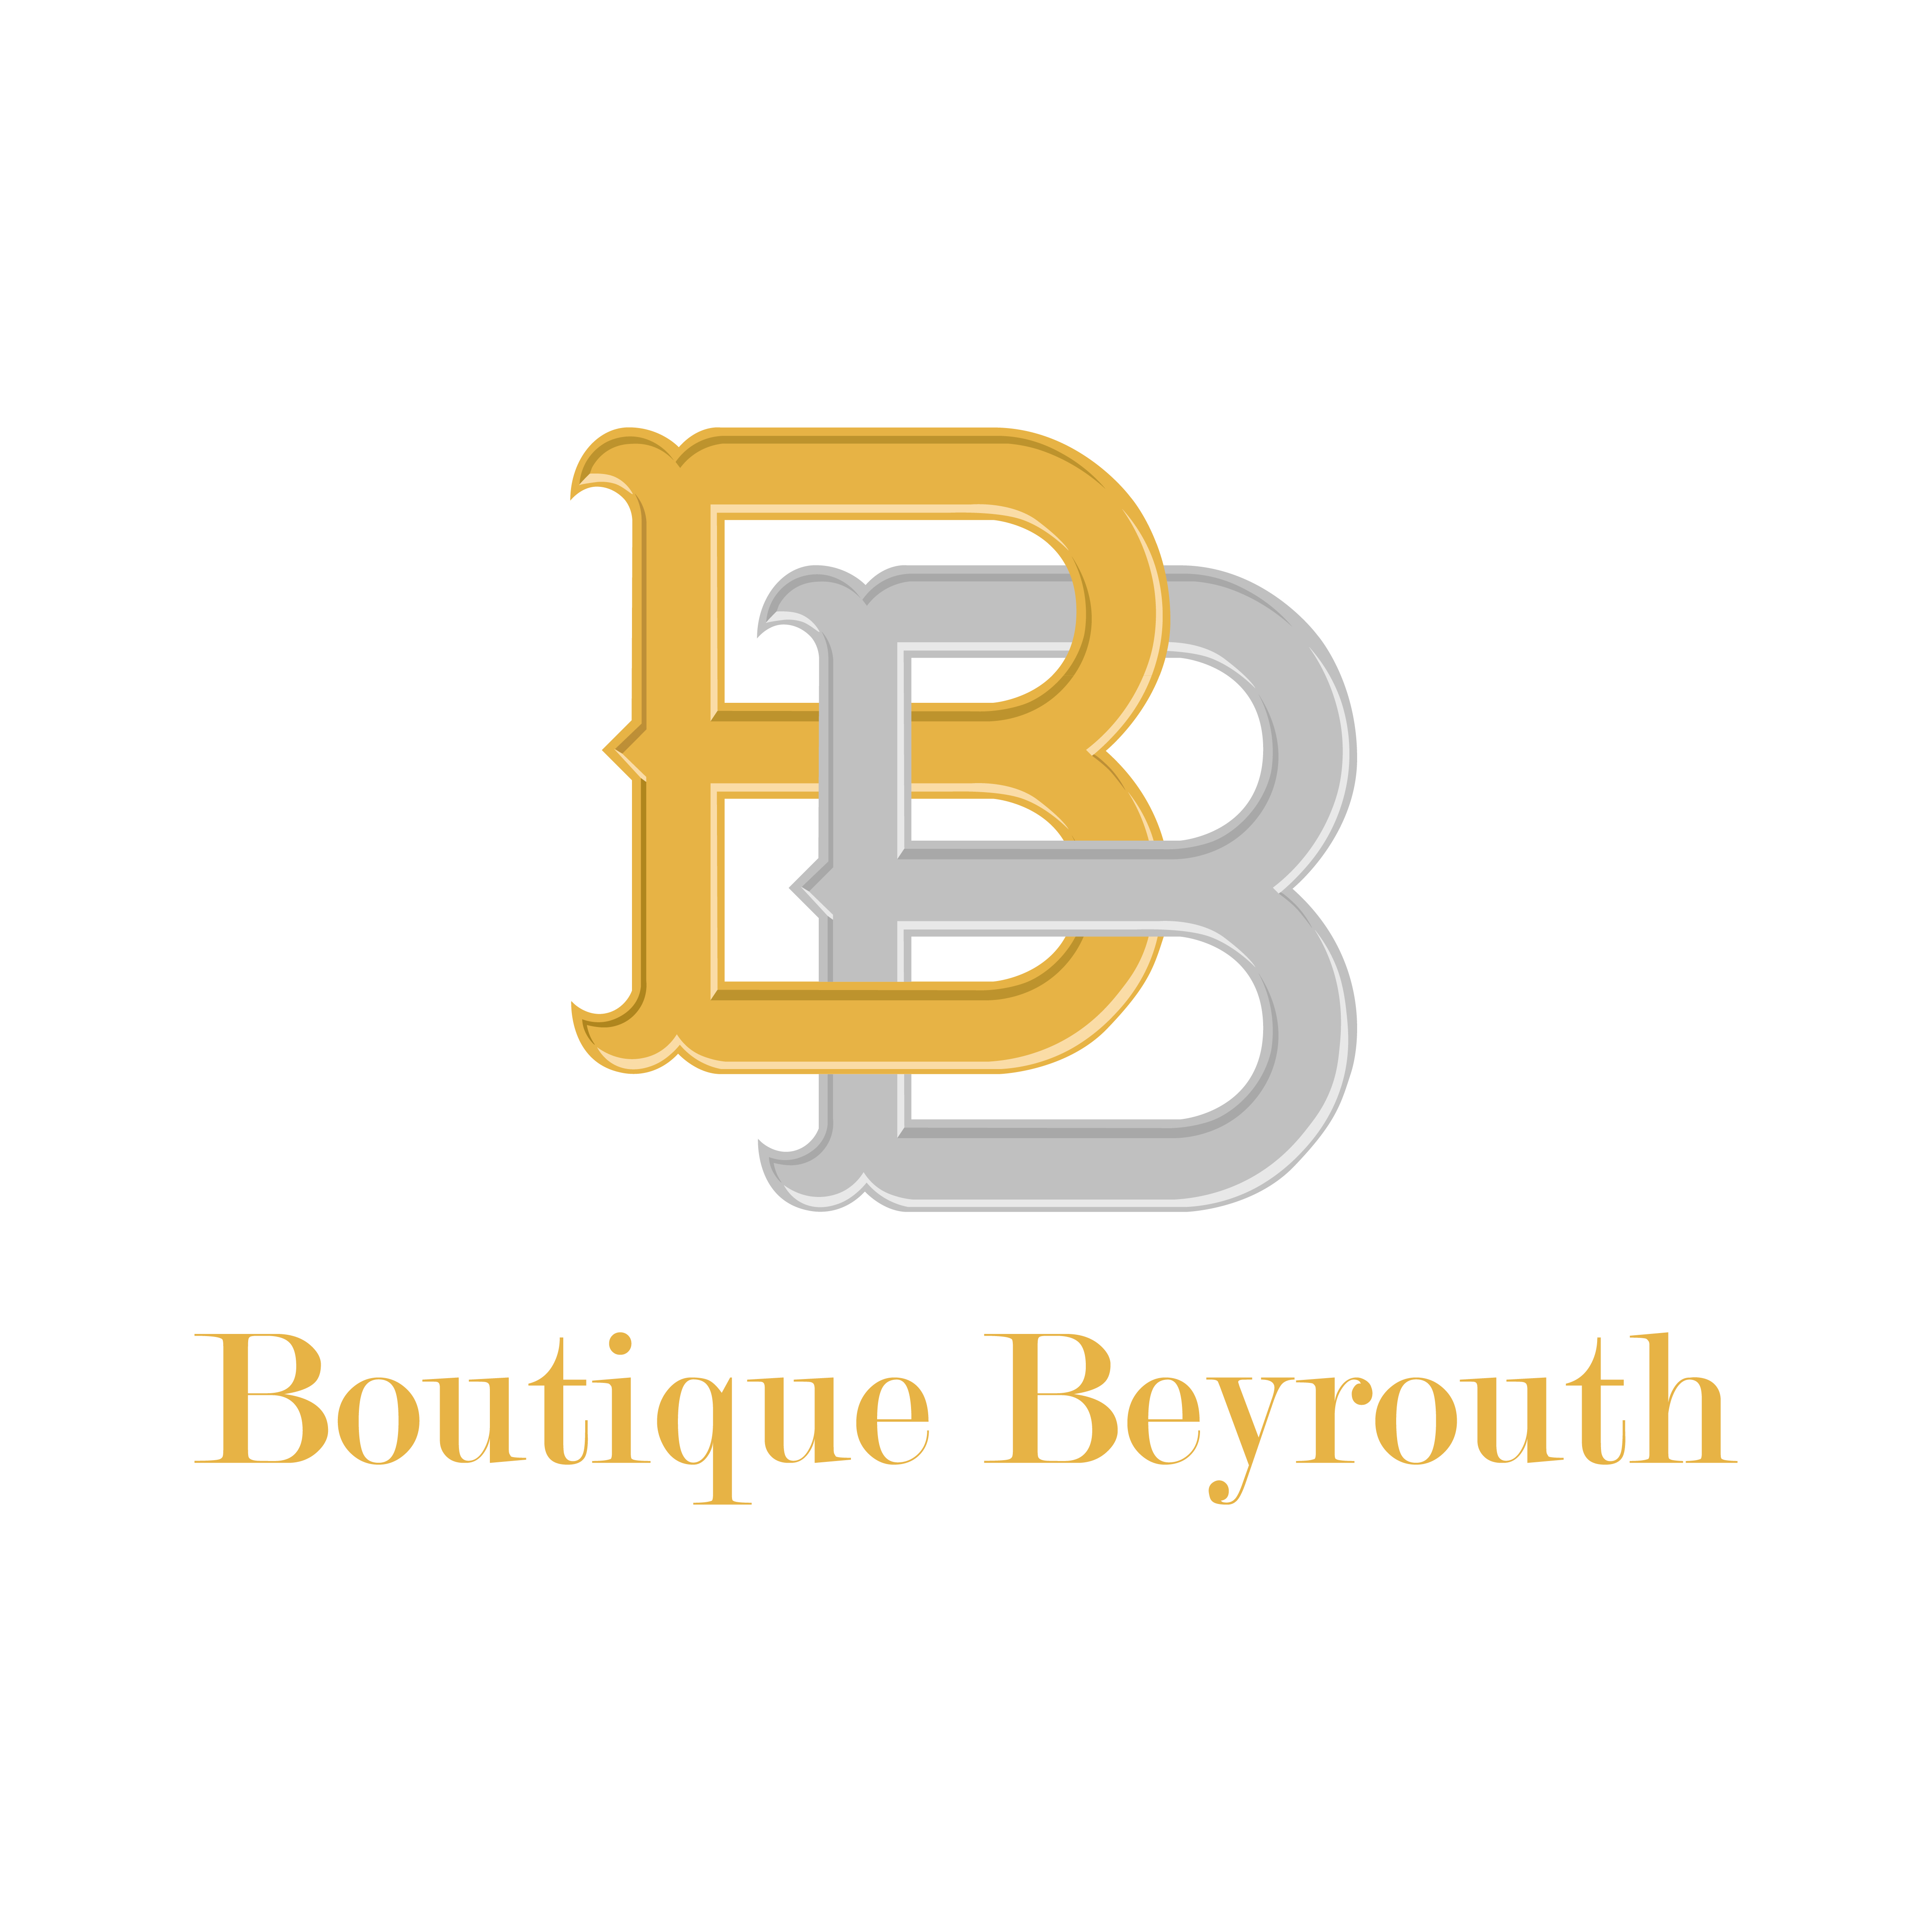 Boutique Beyrouth